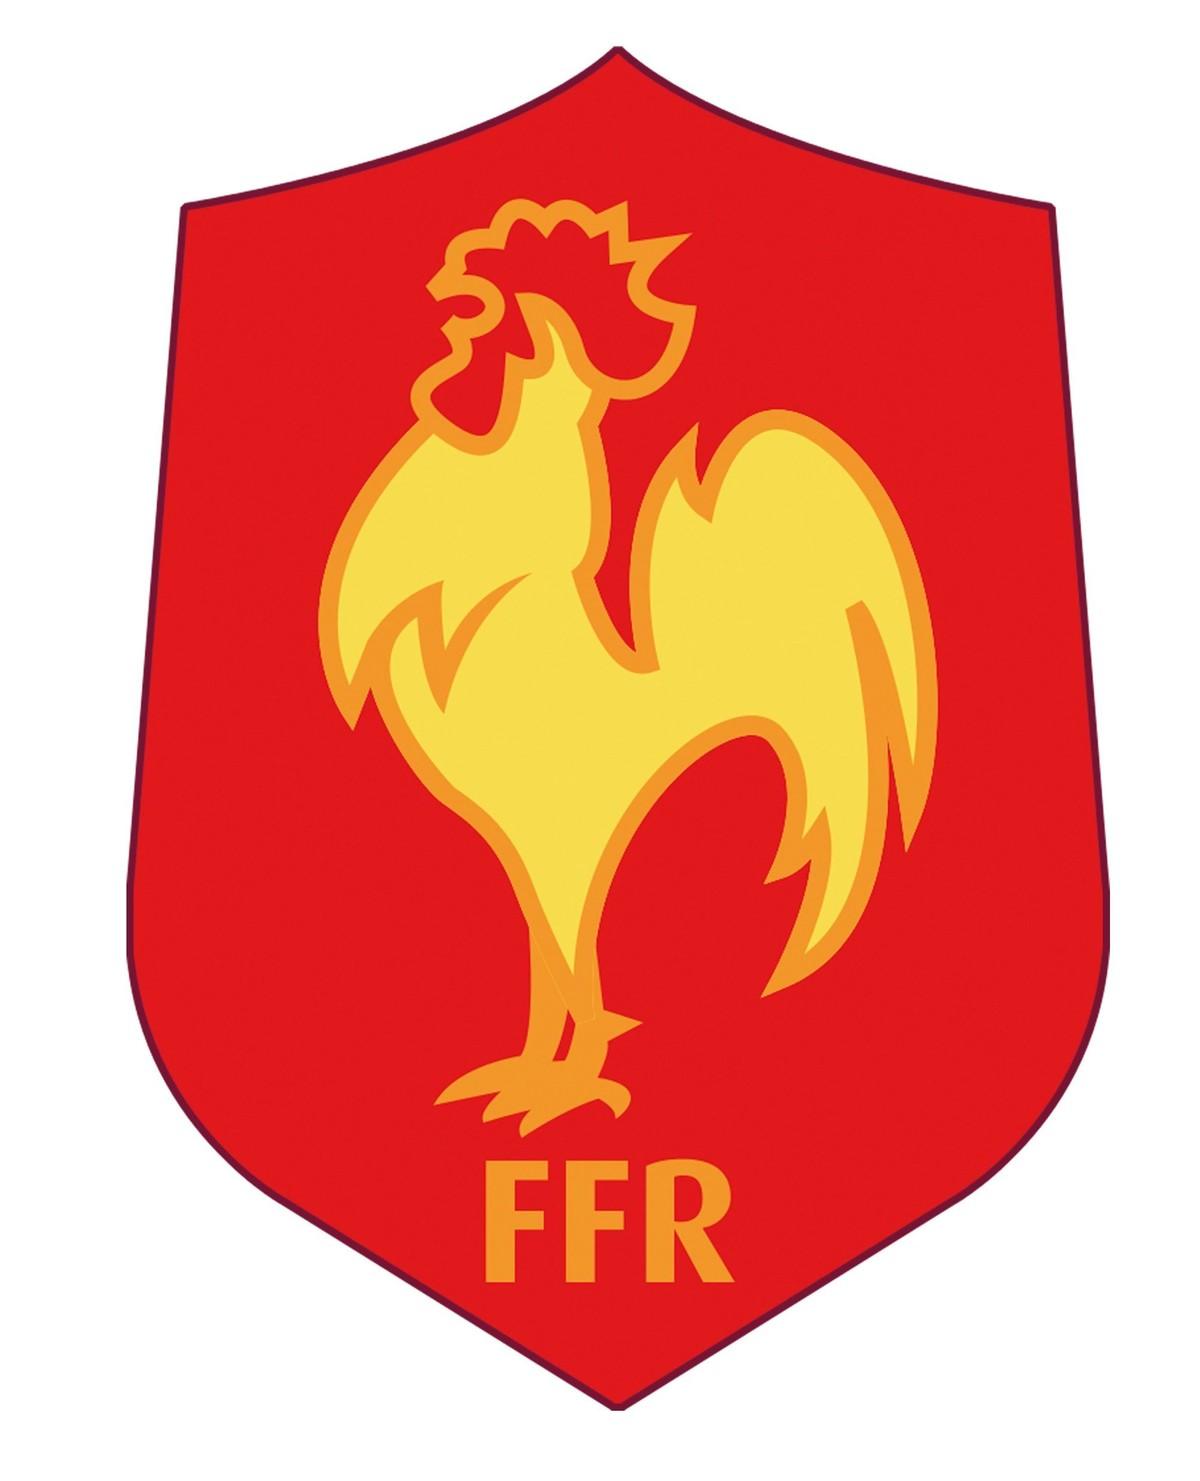 Rugby team emblem, a yellow rooster with the letter FFR and a red background